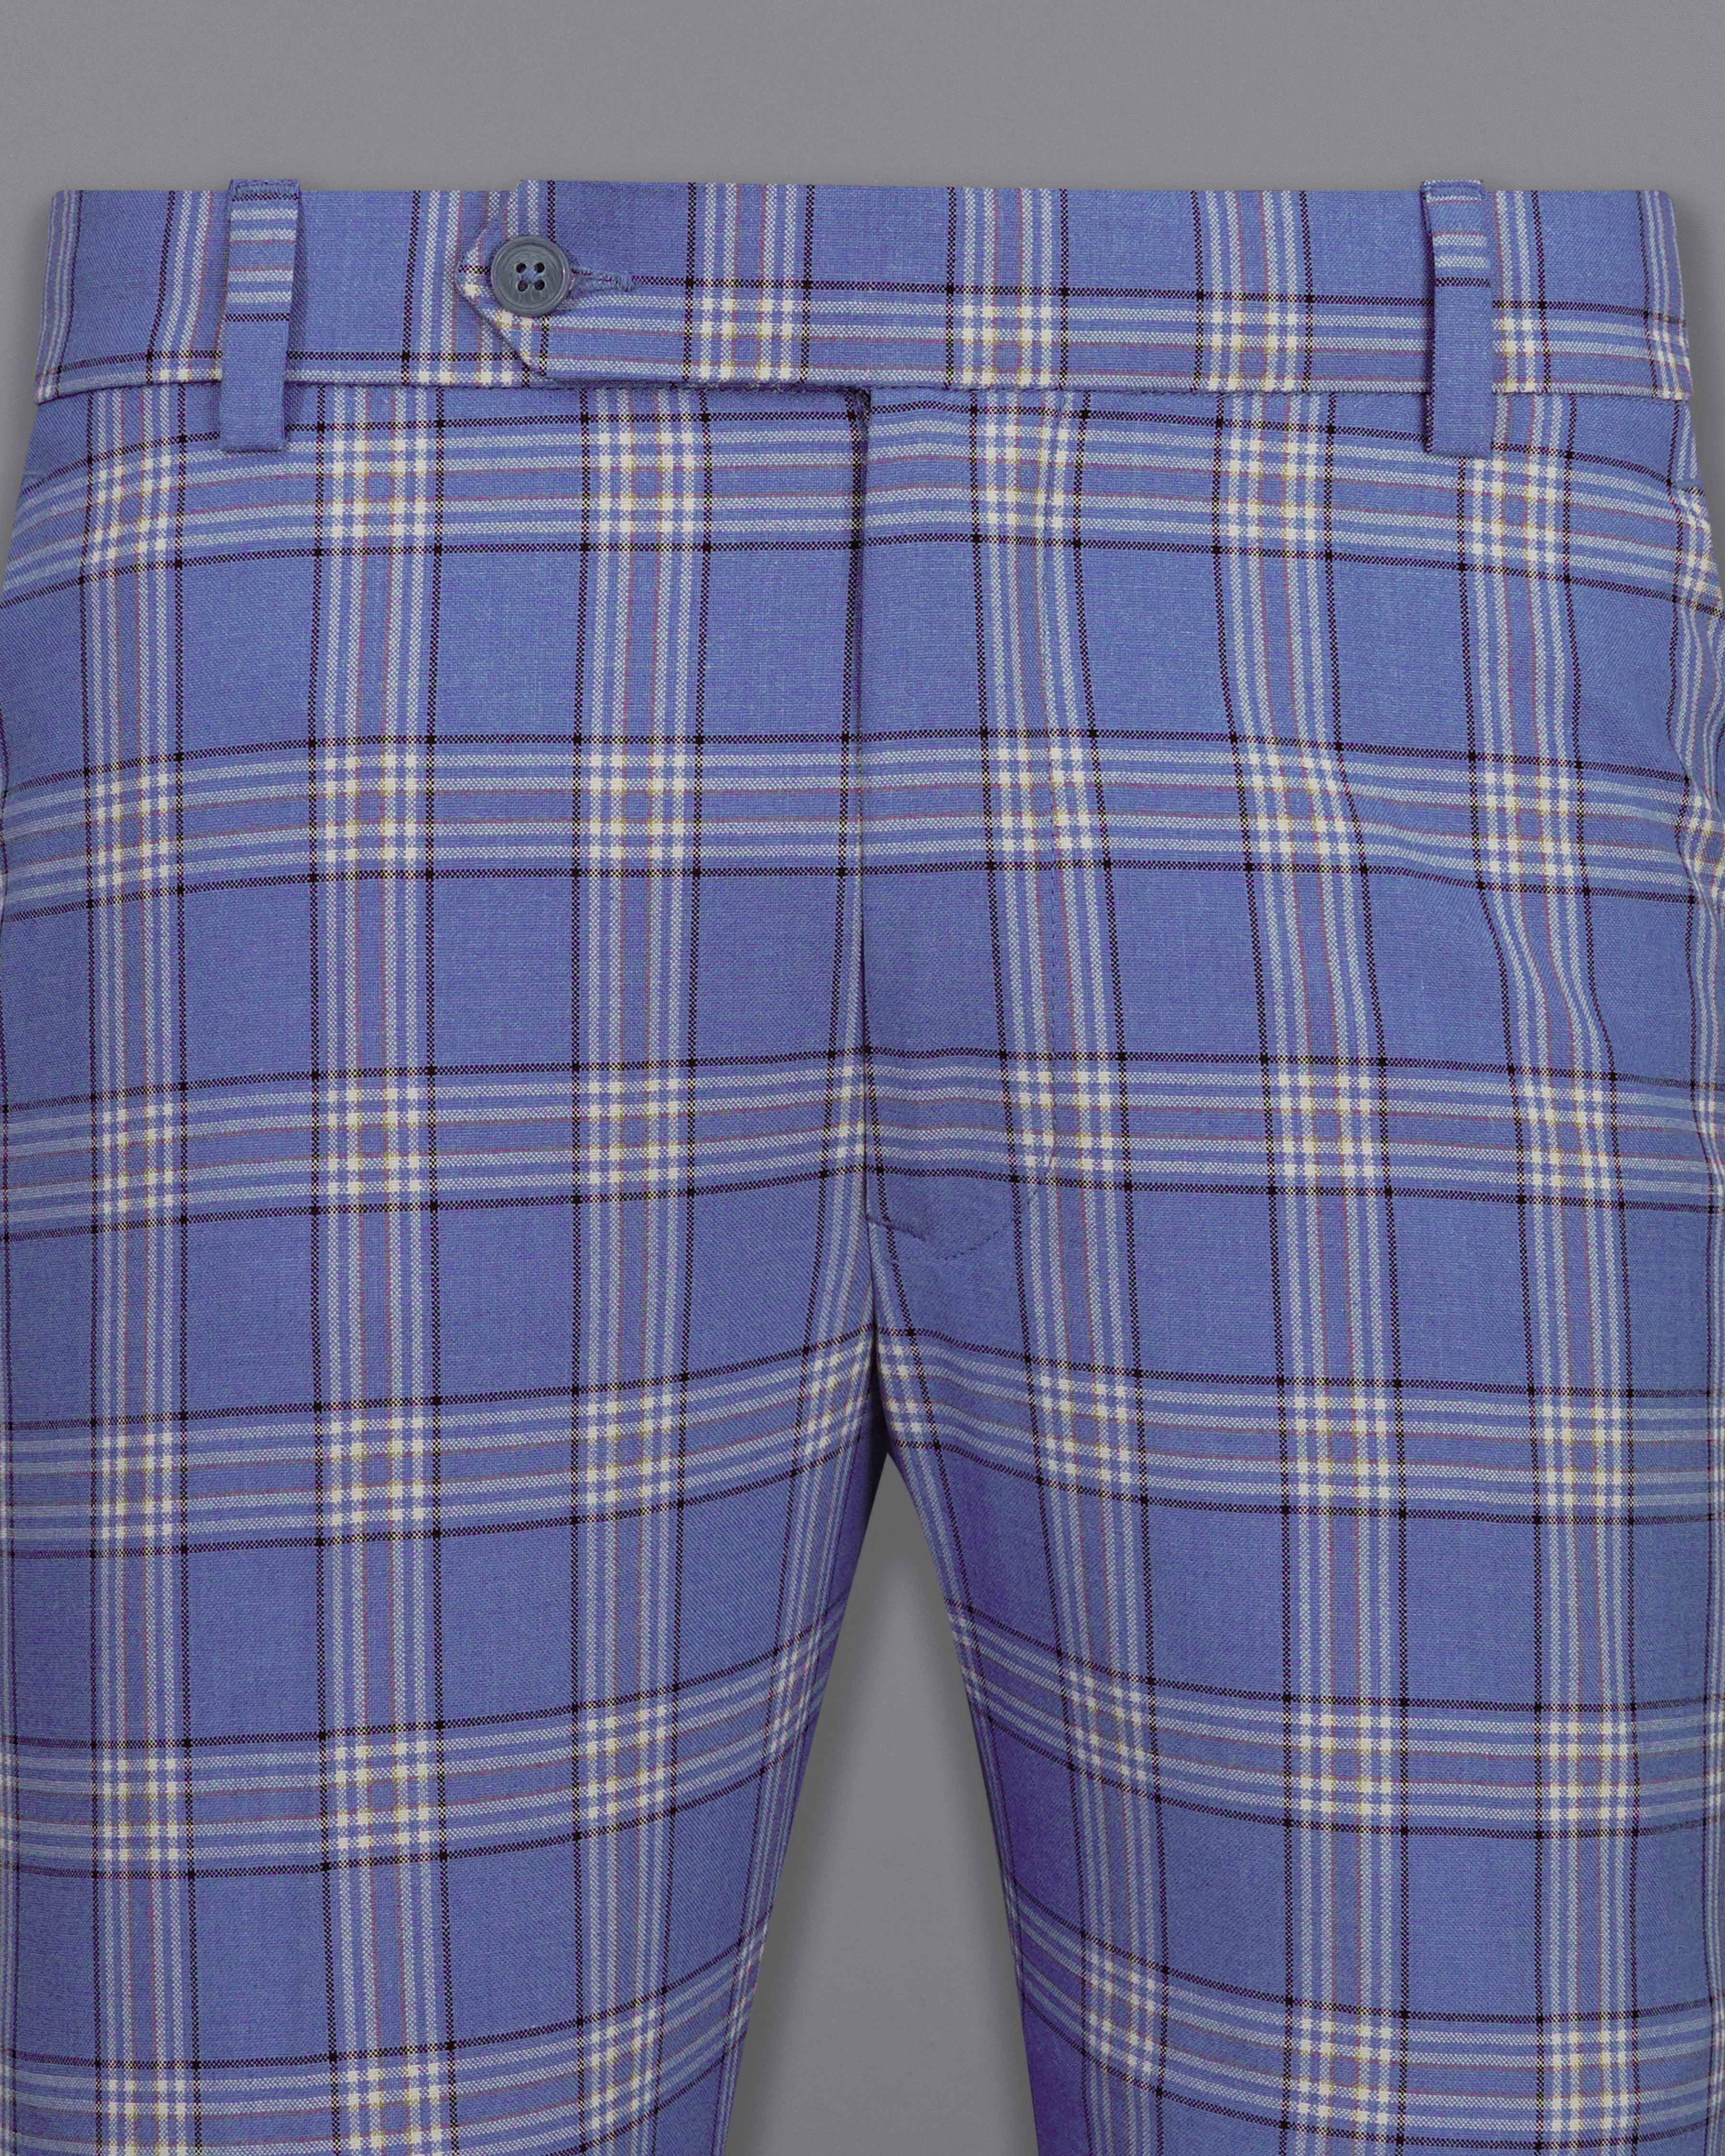 Scampi Blue with Heather Gray Plaid Pant T2042-28, T2042-30, T2042-32, T2042-34, T2042-36, T2042-38, T2042-40, T2042-42, T2042-44